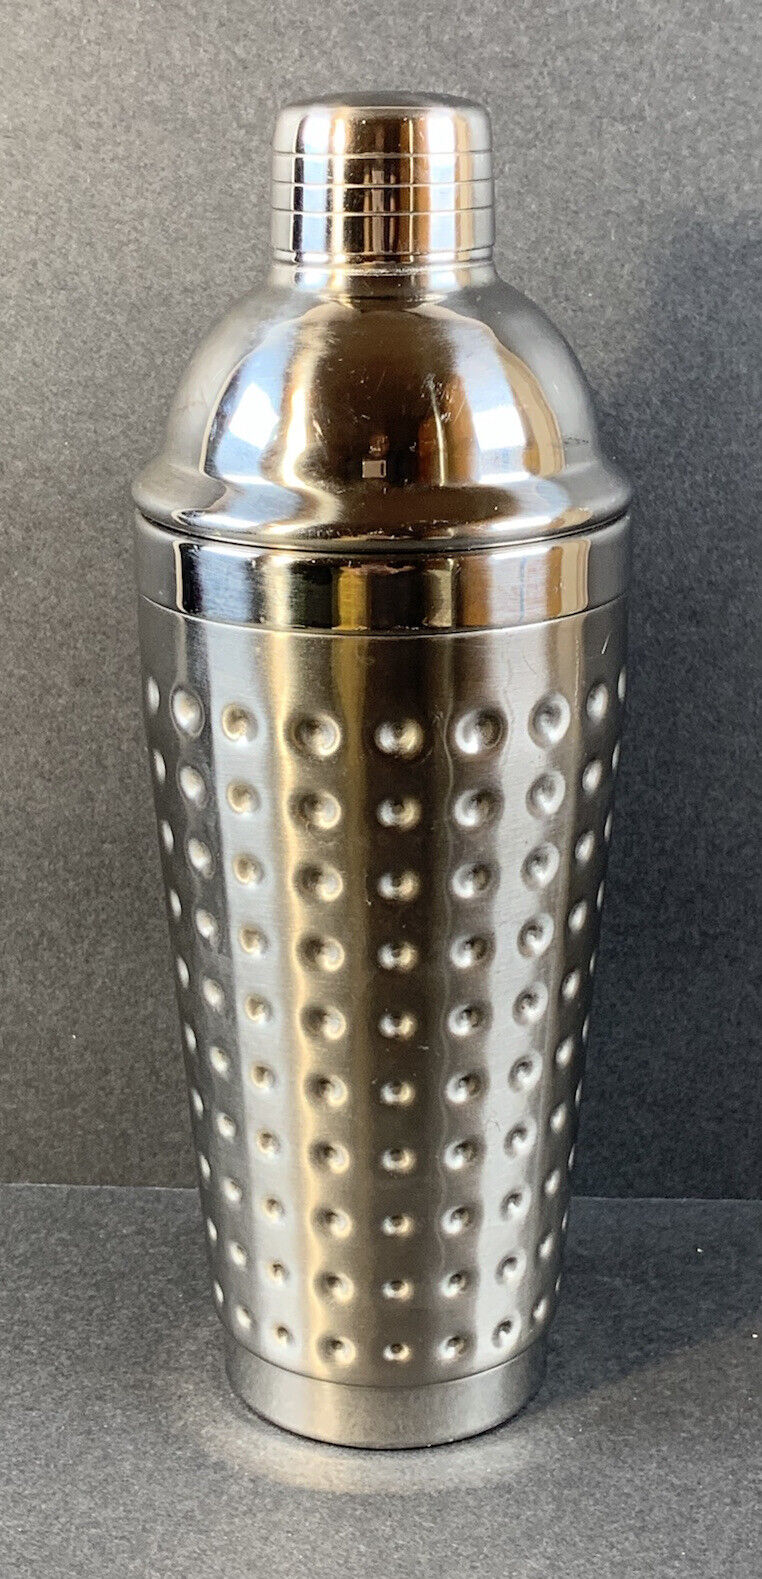 Vintage Stainless Steel Cocktail Shaker Hammered Finish Martini Barware Mixer